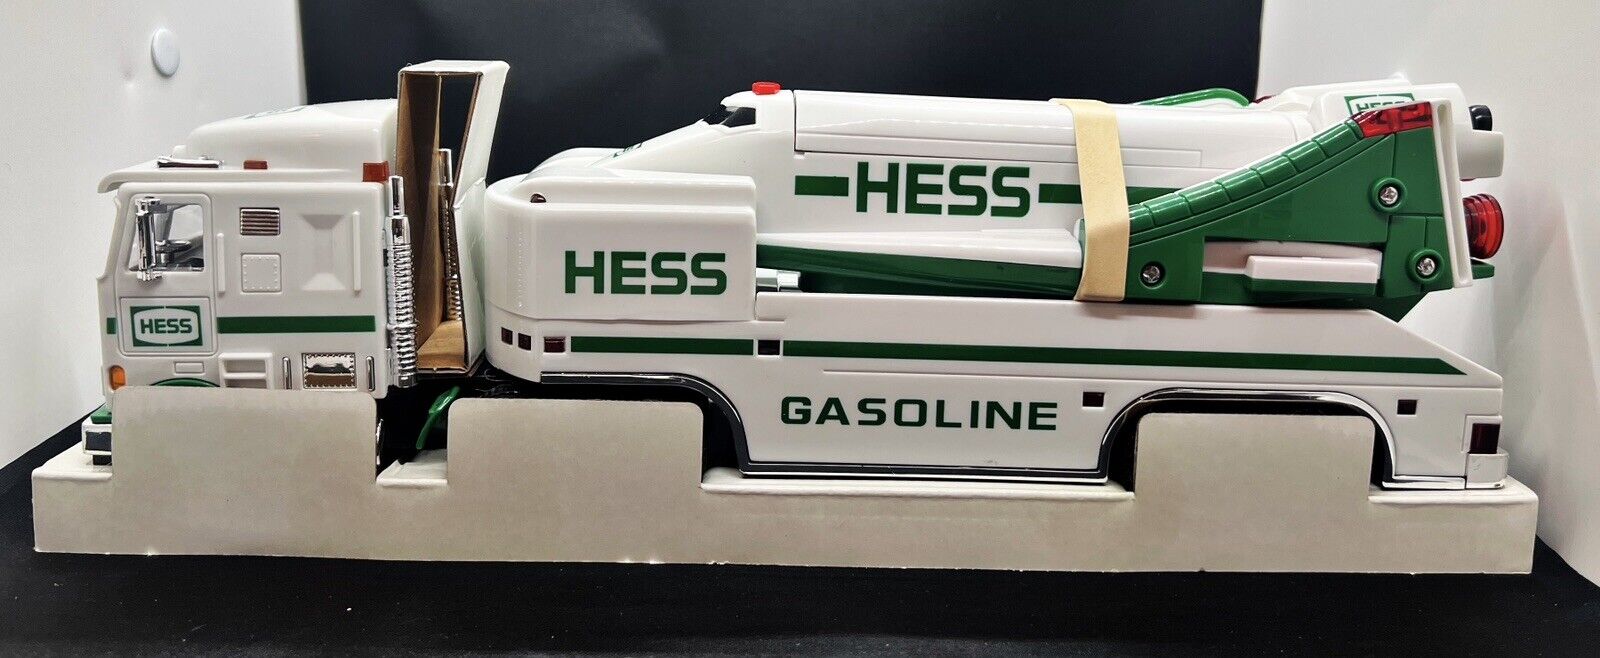 Hess Vintage 1999 Toy Truck and Space Shuttle With Satellite New in Original Box